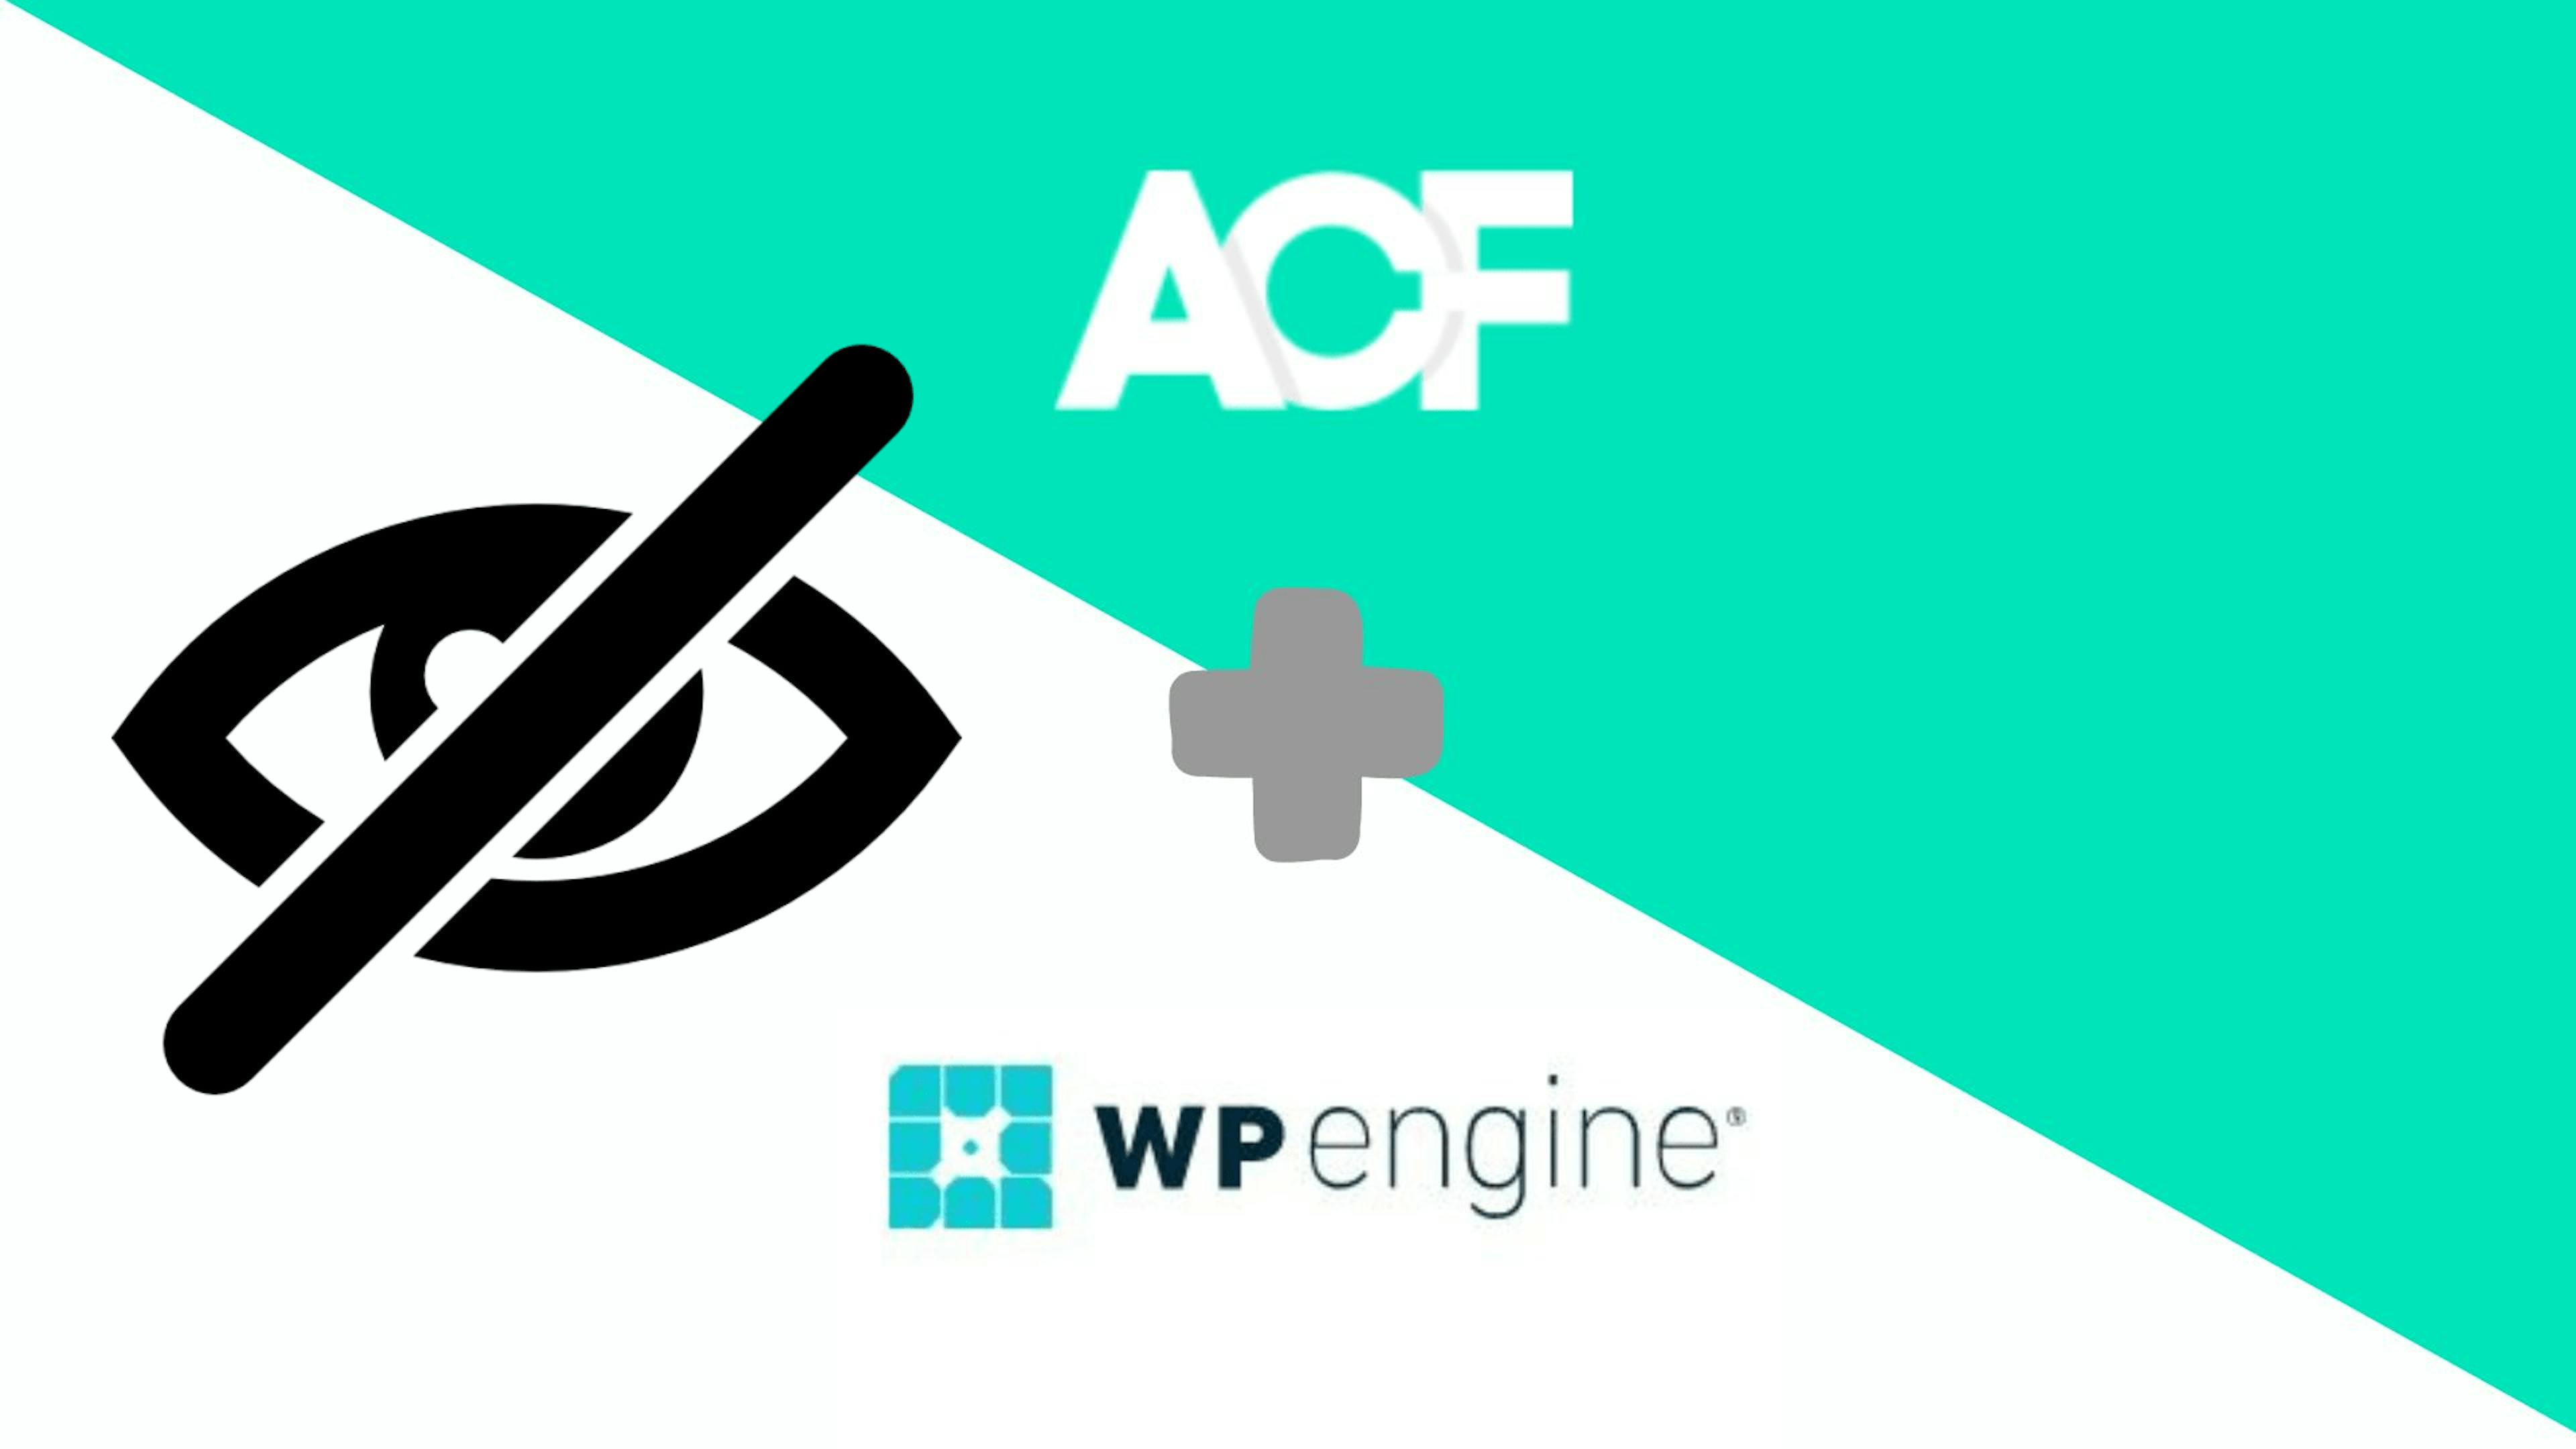 ACF and wpengine logos with a hidden symbol icon